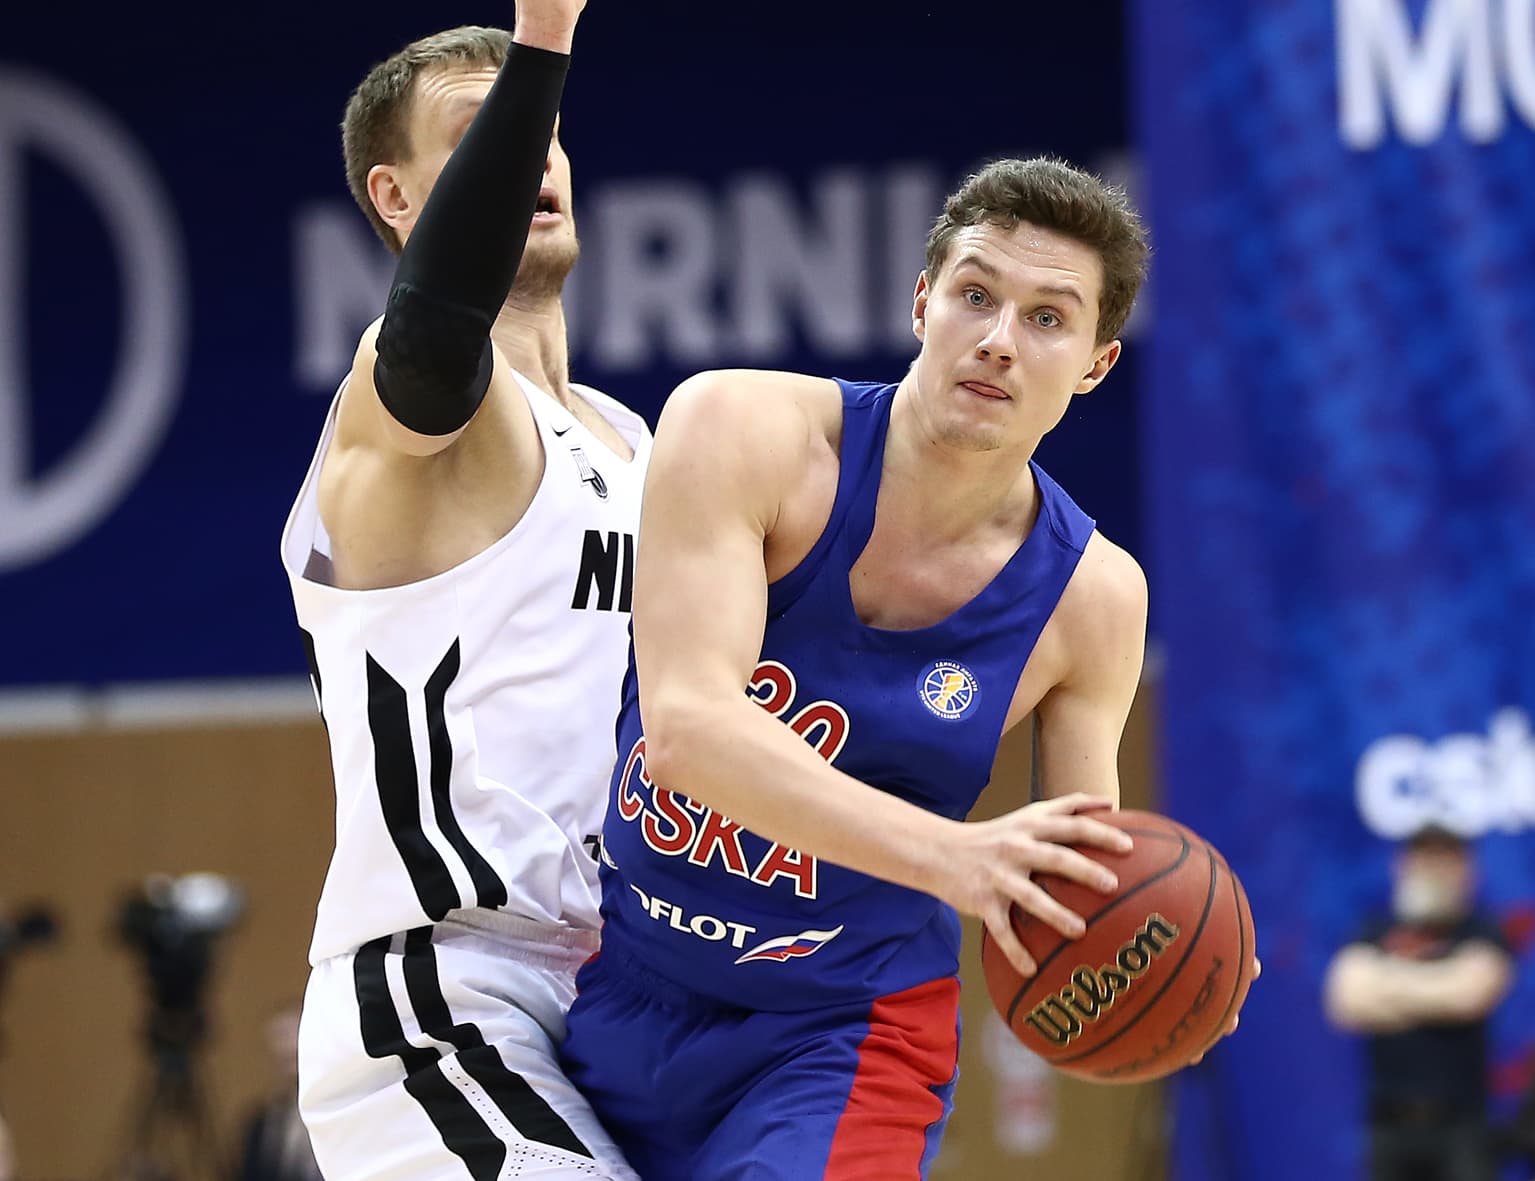 Mikhail Kulagin Replaces Alexey Shved At The All-Star Game